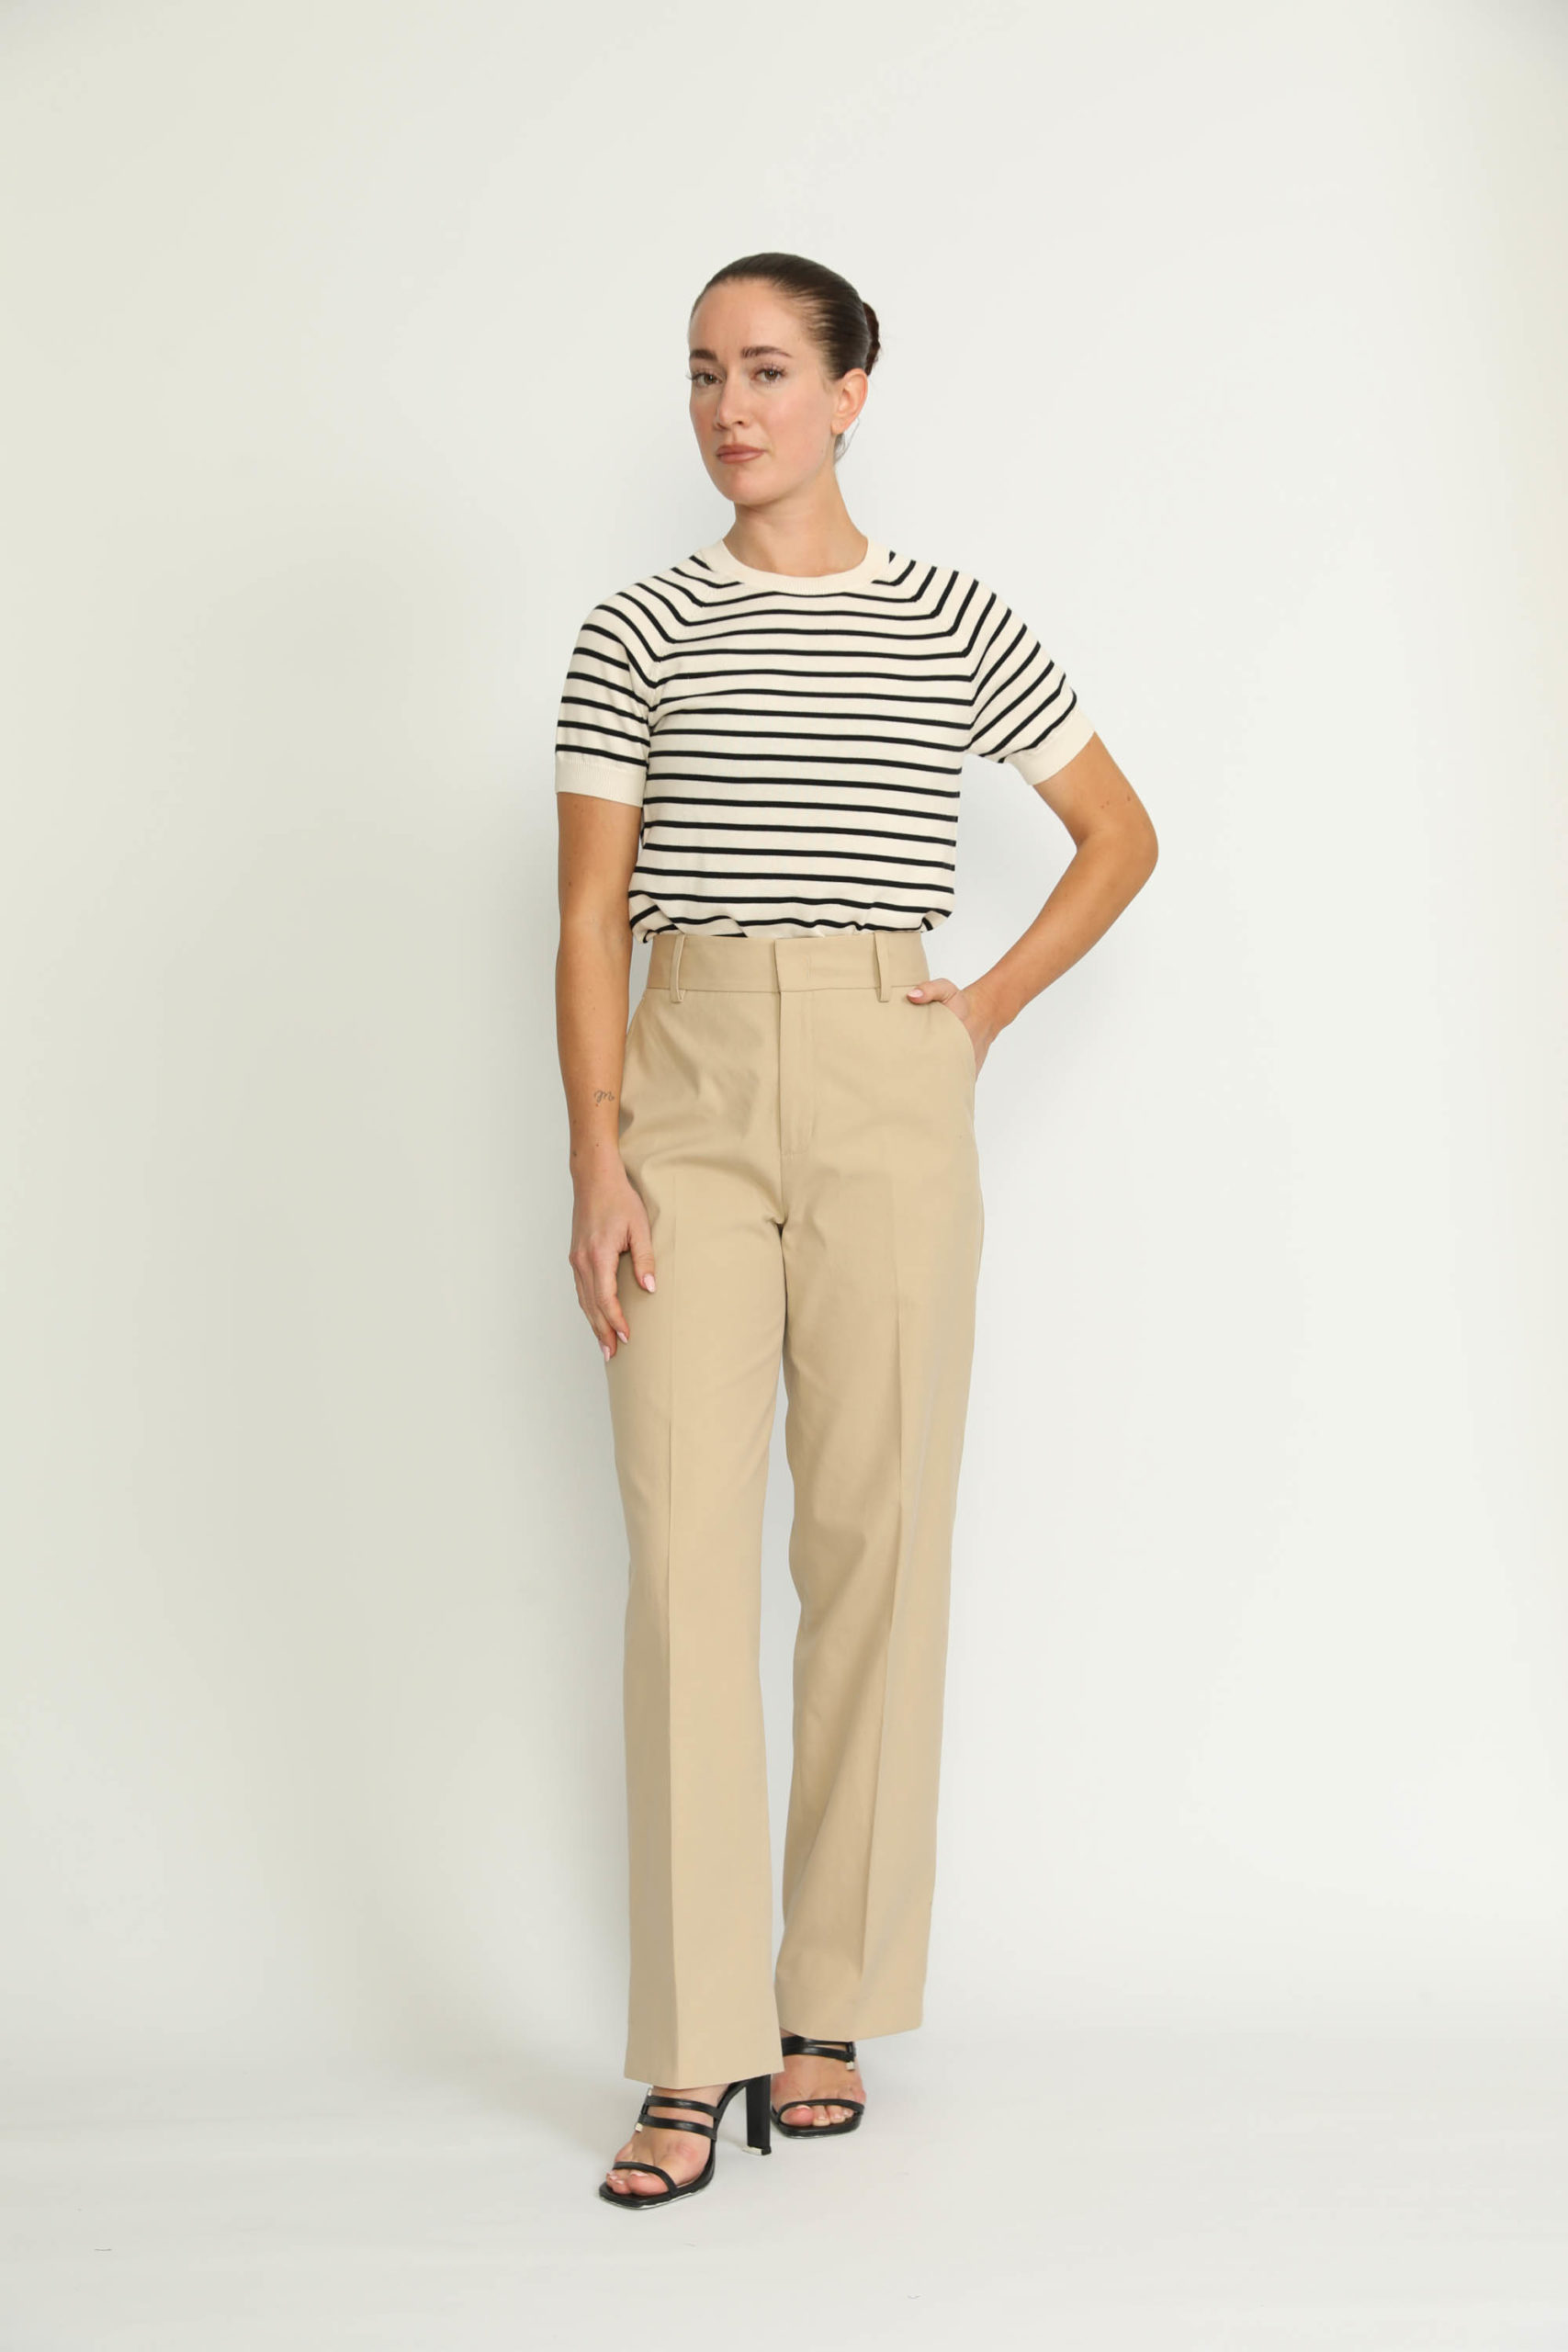 Manchester Trousers – Manchester High-Waisted Khaki Beige Twill Trousers